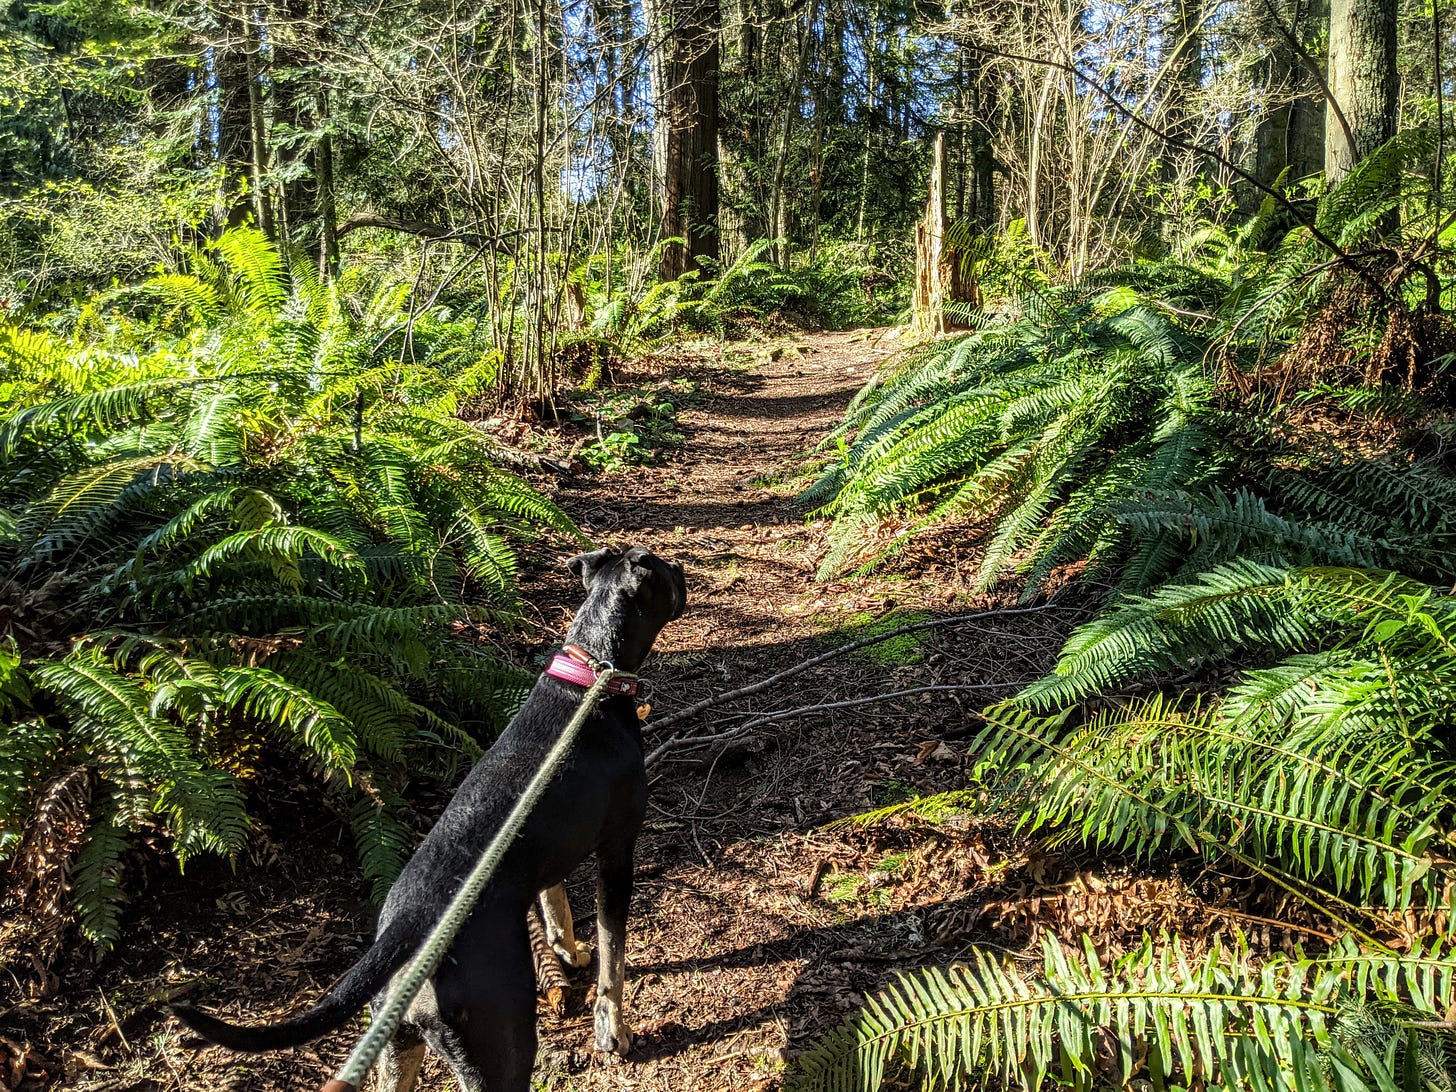 Mabel is eager to travel the path of understanding. (Photo: David Roberts)